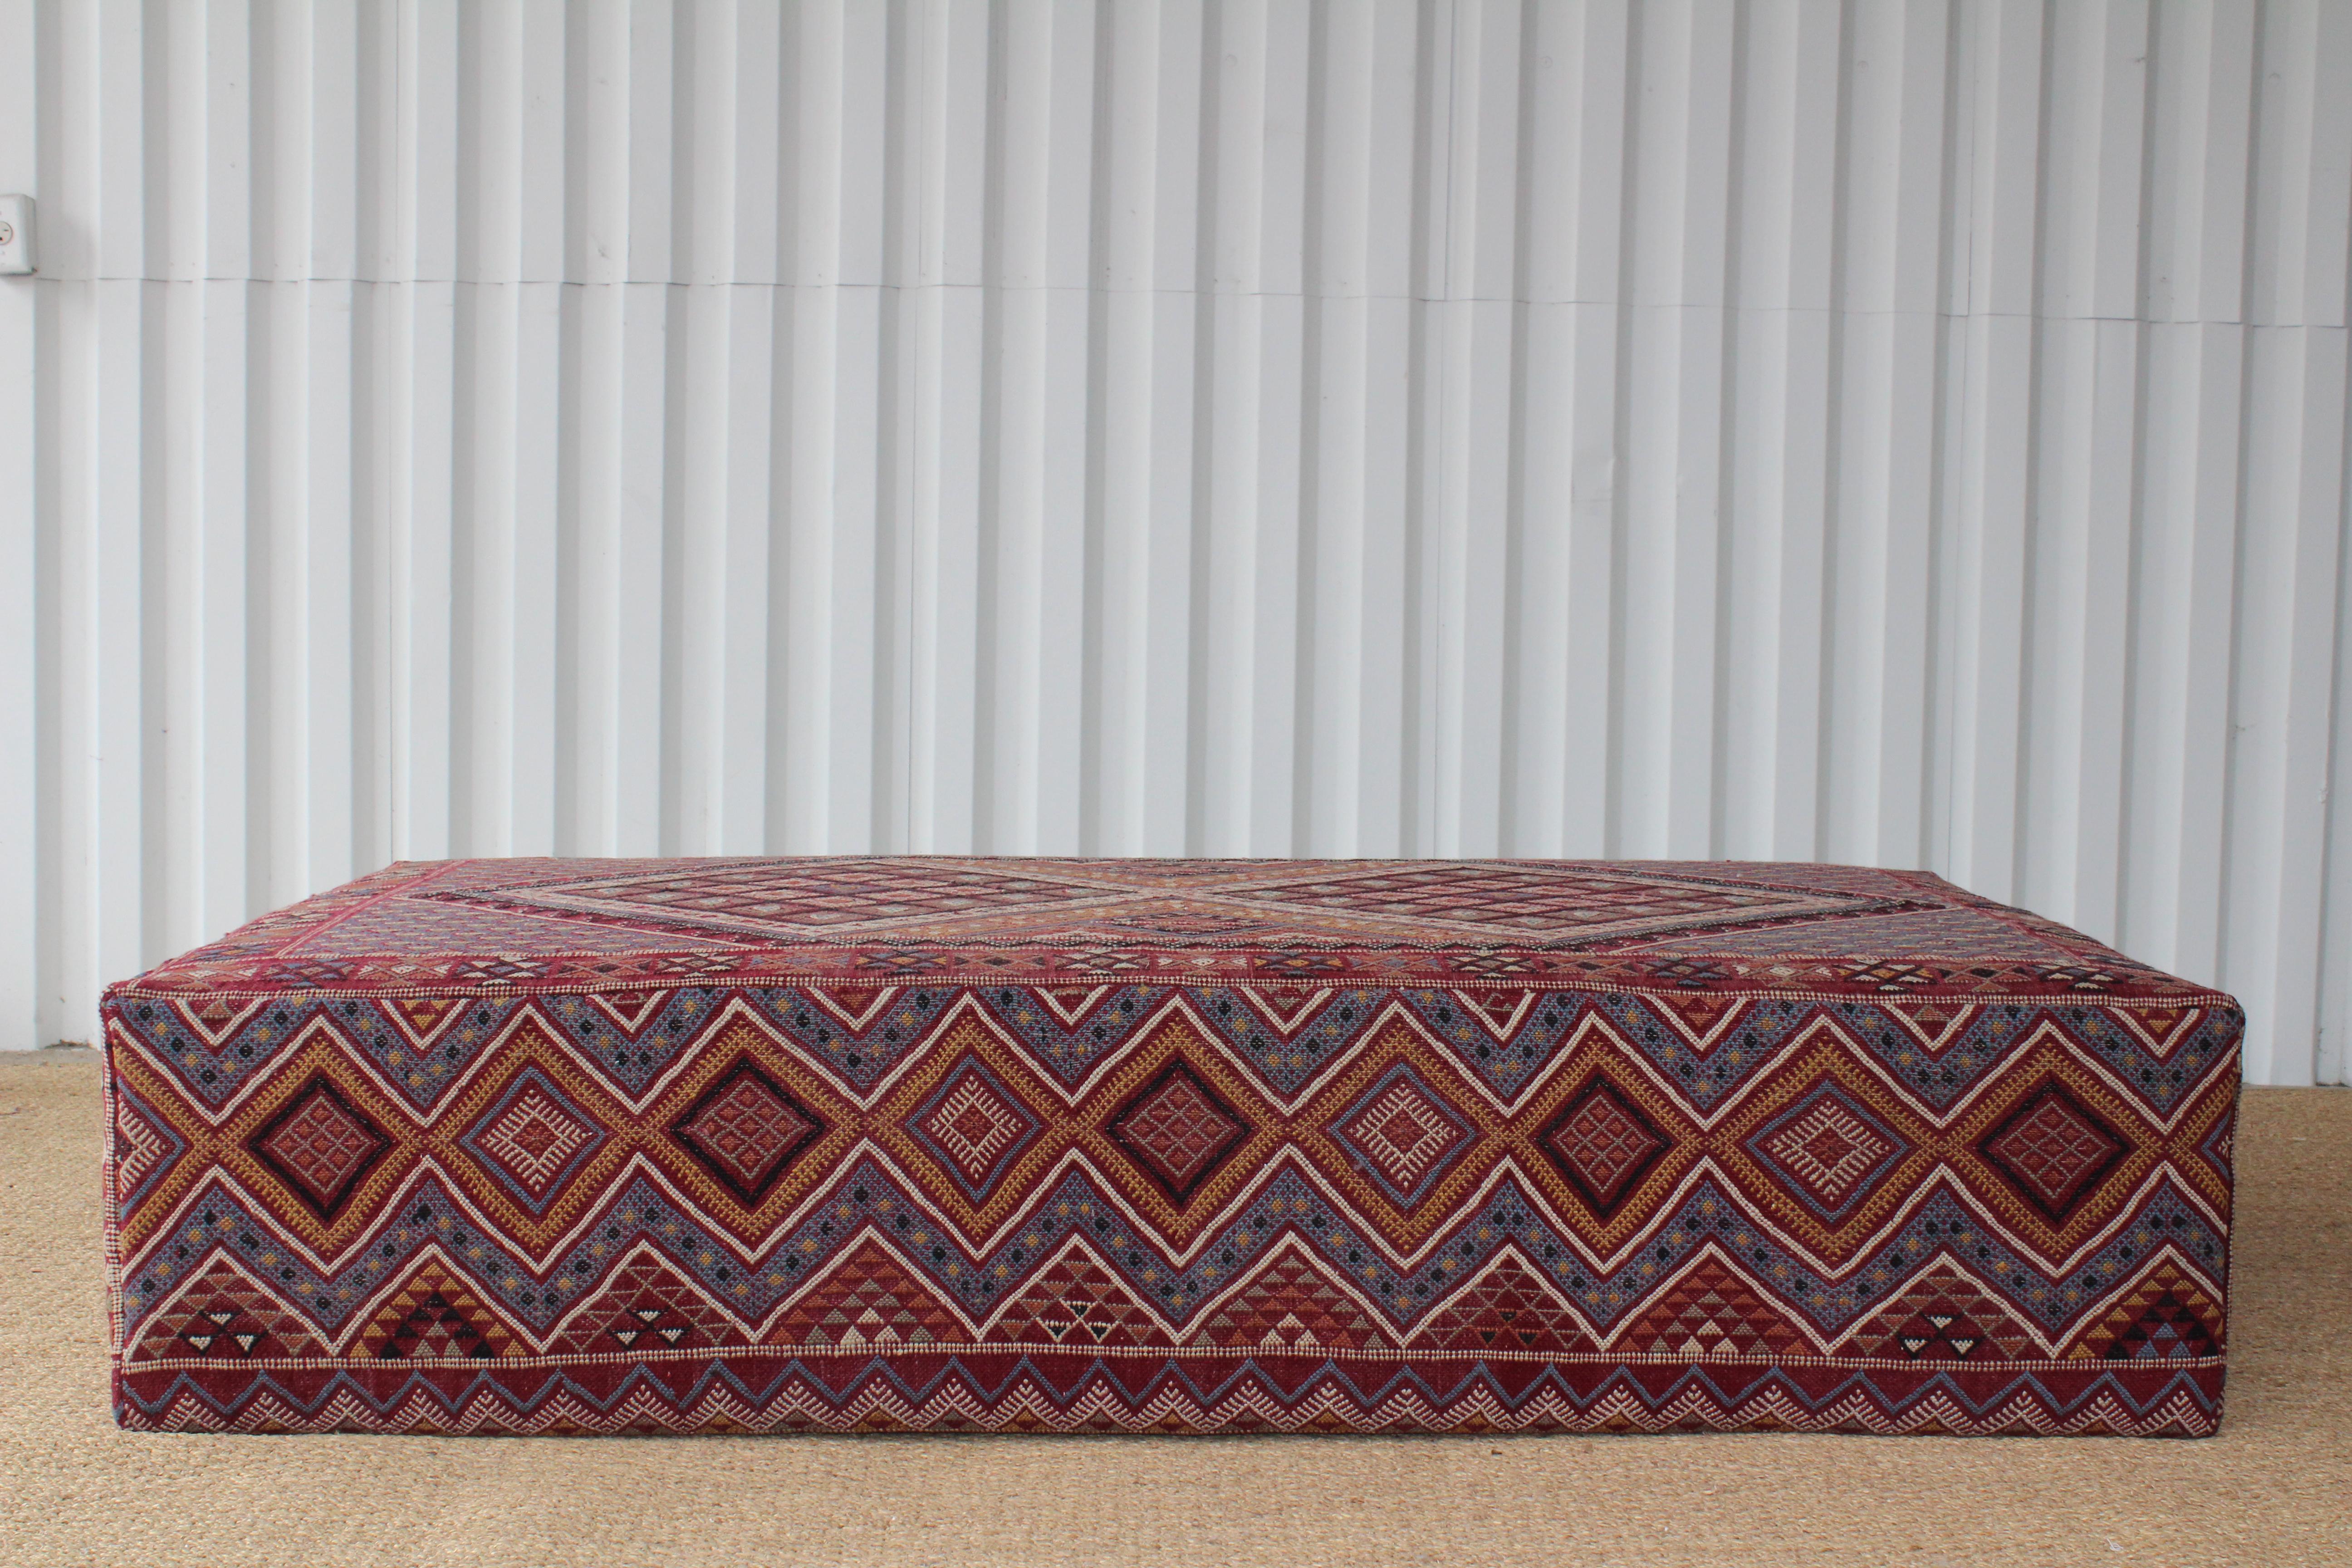 Large, custom made ottoman, upholstered with a vintage Turkish rug from the 1960s. Wonderful condition, rug has been professionally cleaned and has no stains, rips, or tears.